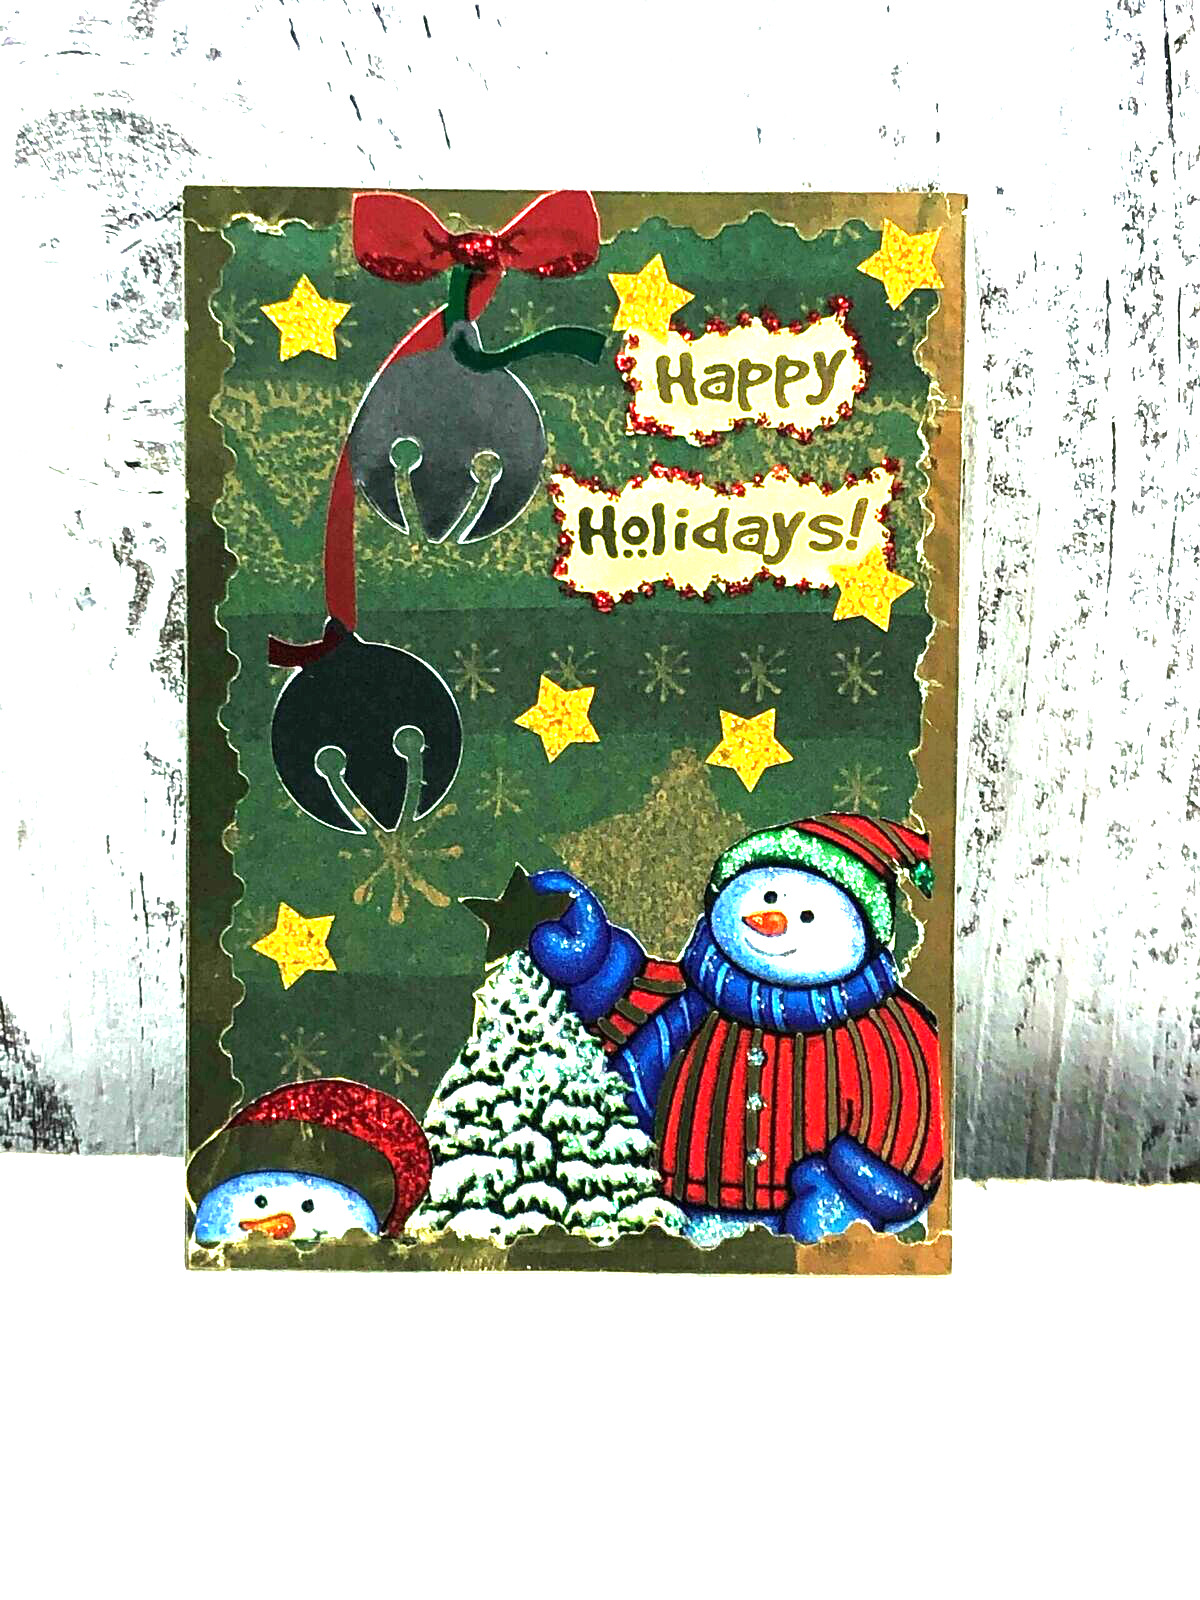 HAPPY HOLIDAYS FROM THE SNOWMAN - ACEO TRADING CARD ARTIST UNKNOWN HAND-MADE